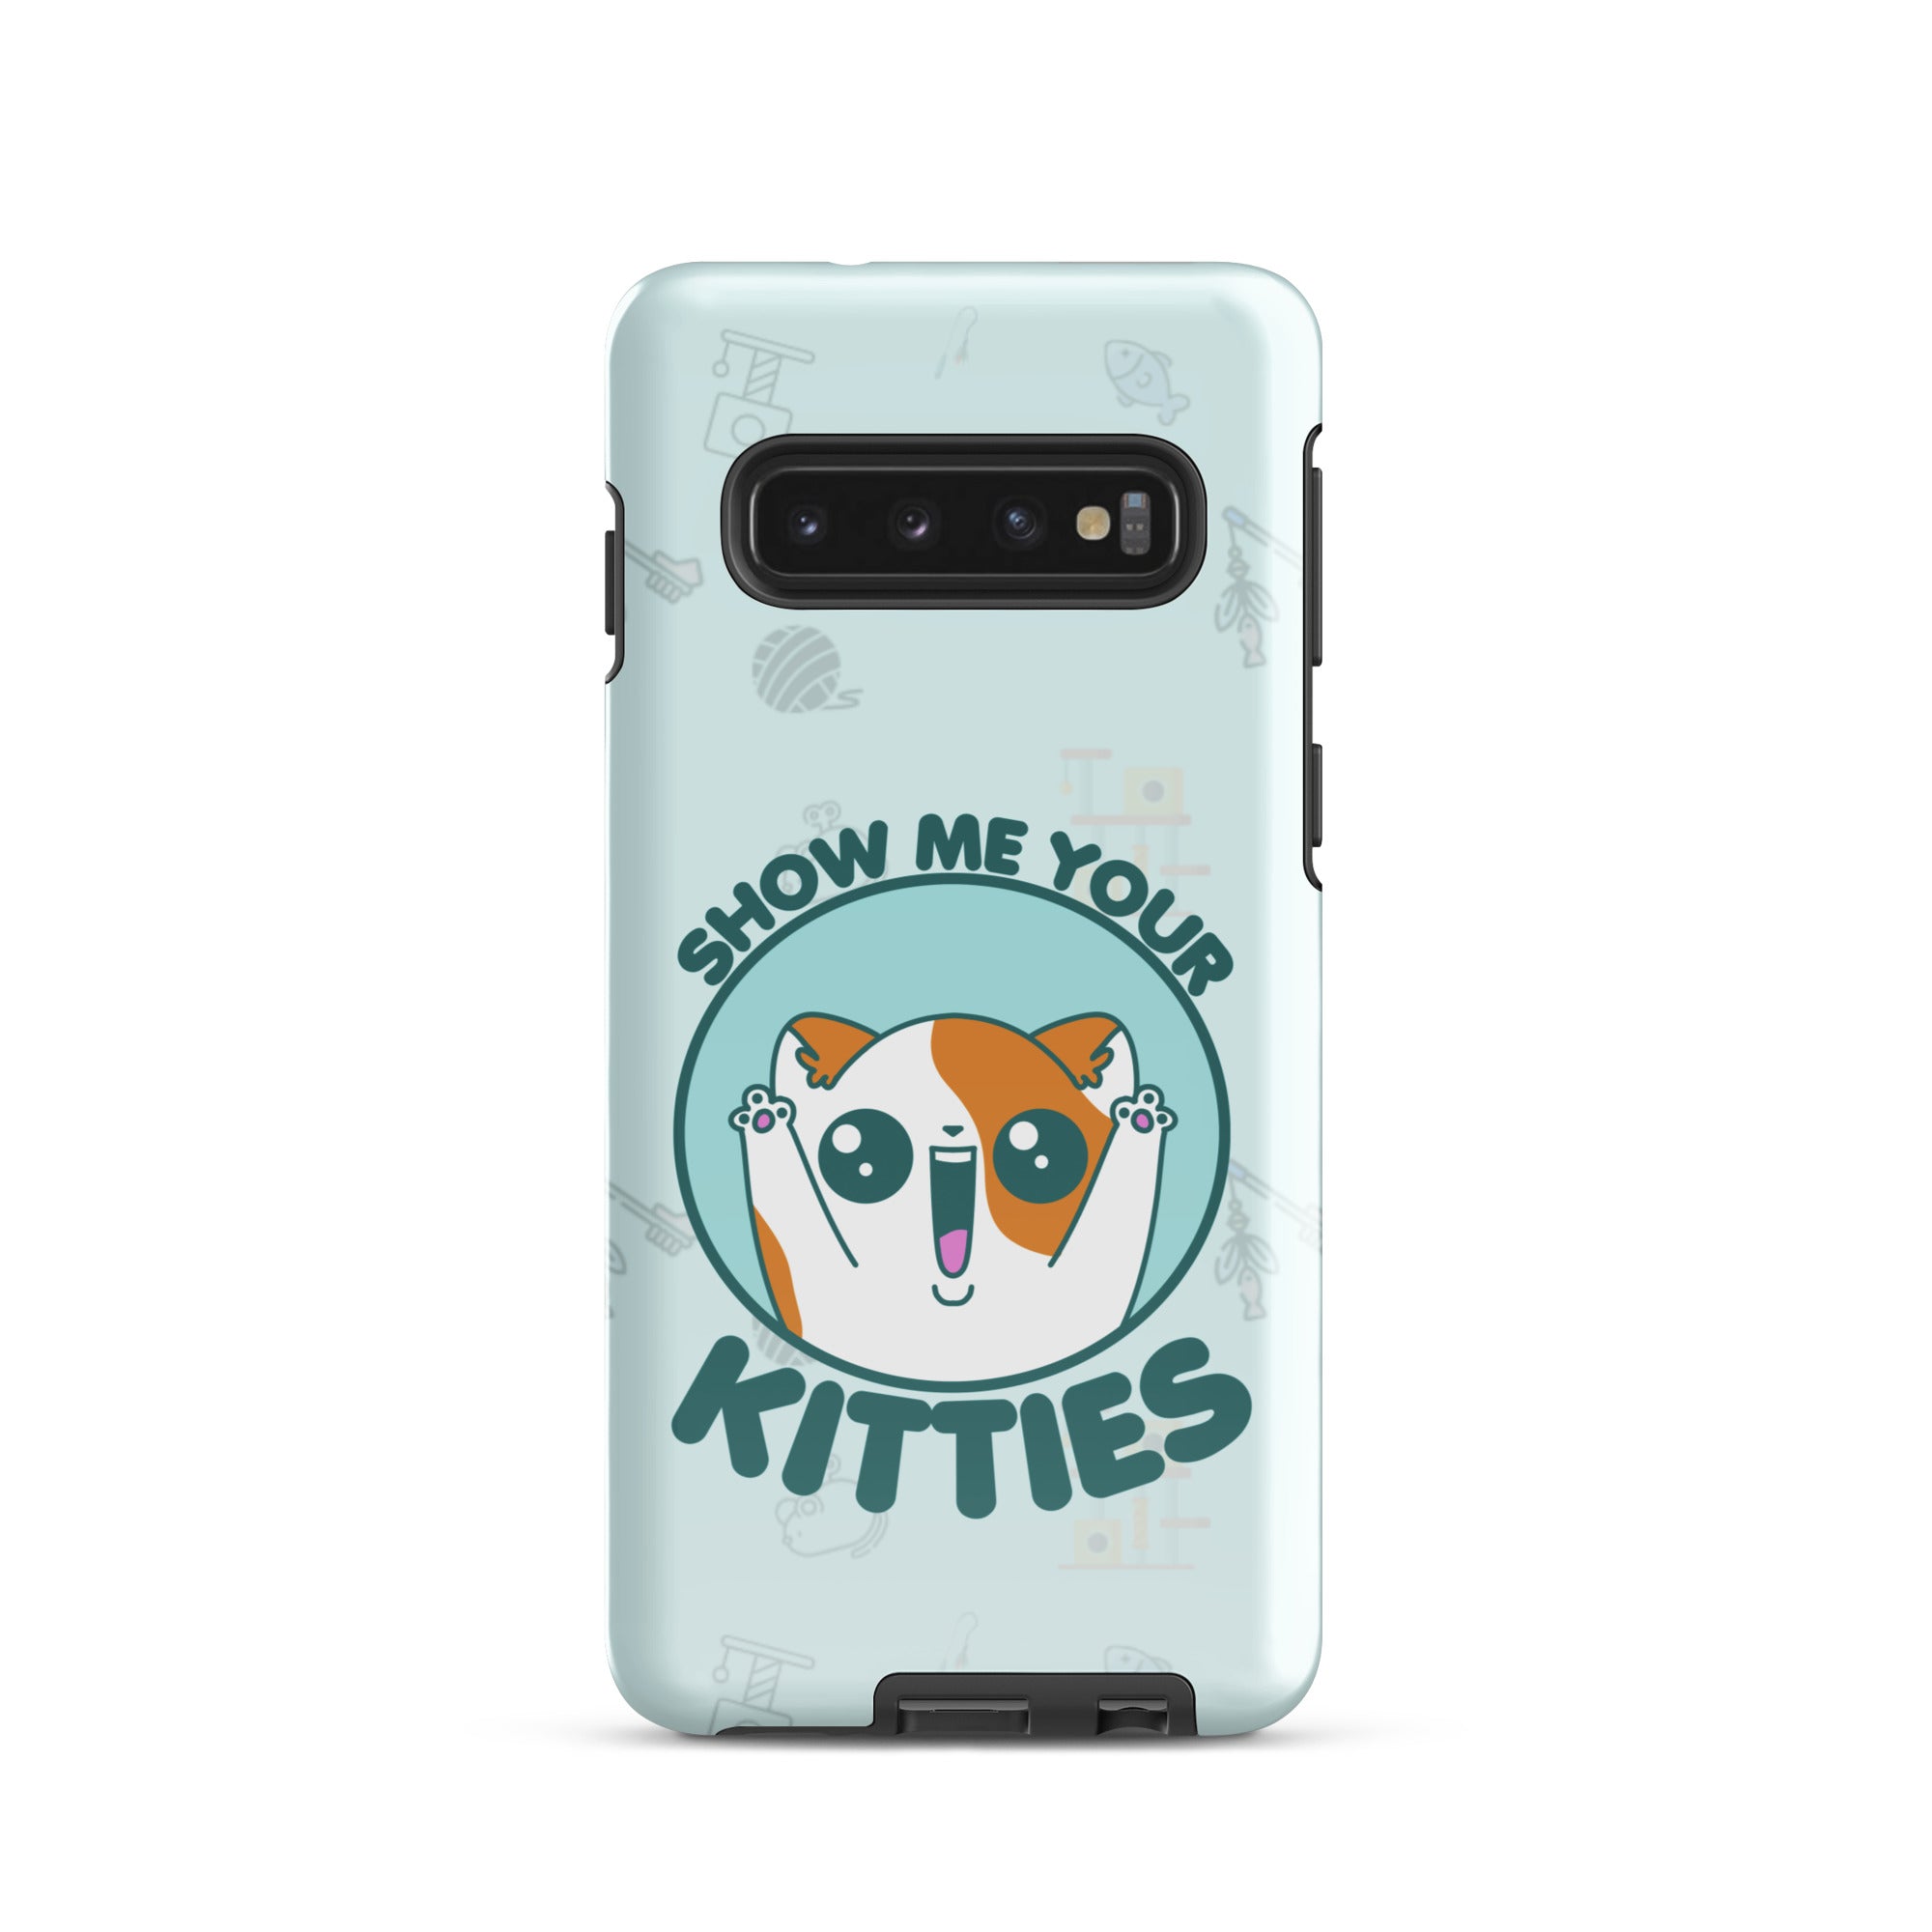 SHOW ME YOUR KITTIES W/BACKGROUND - Tough case for Samsung®